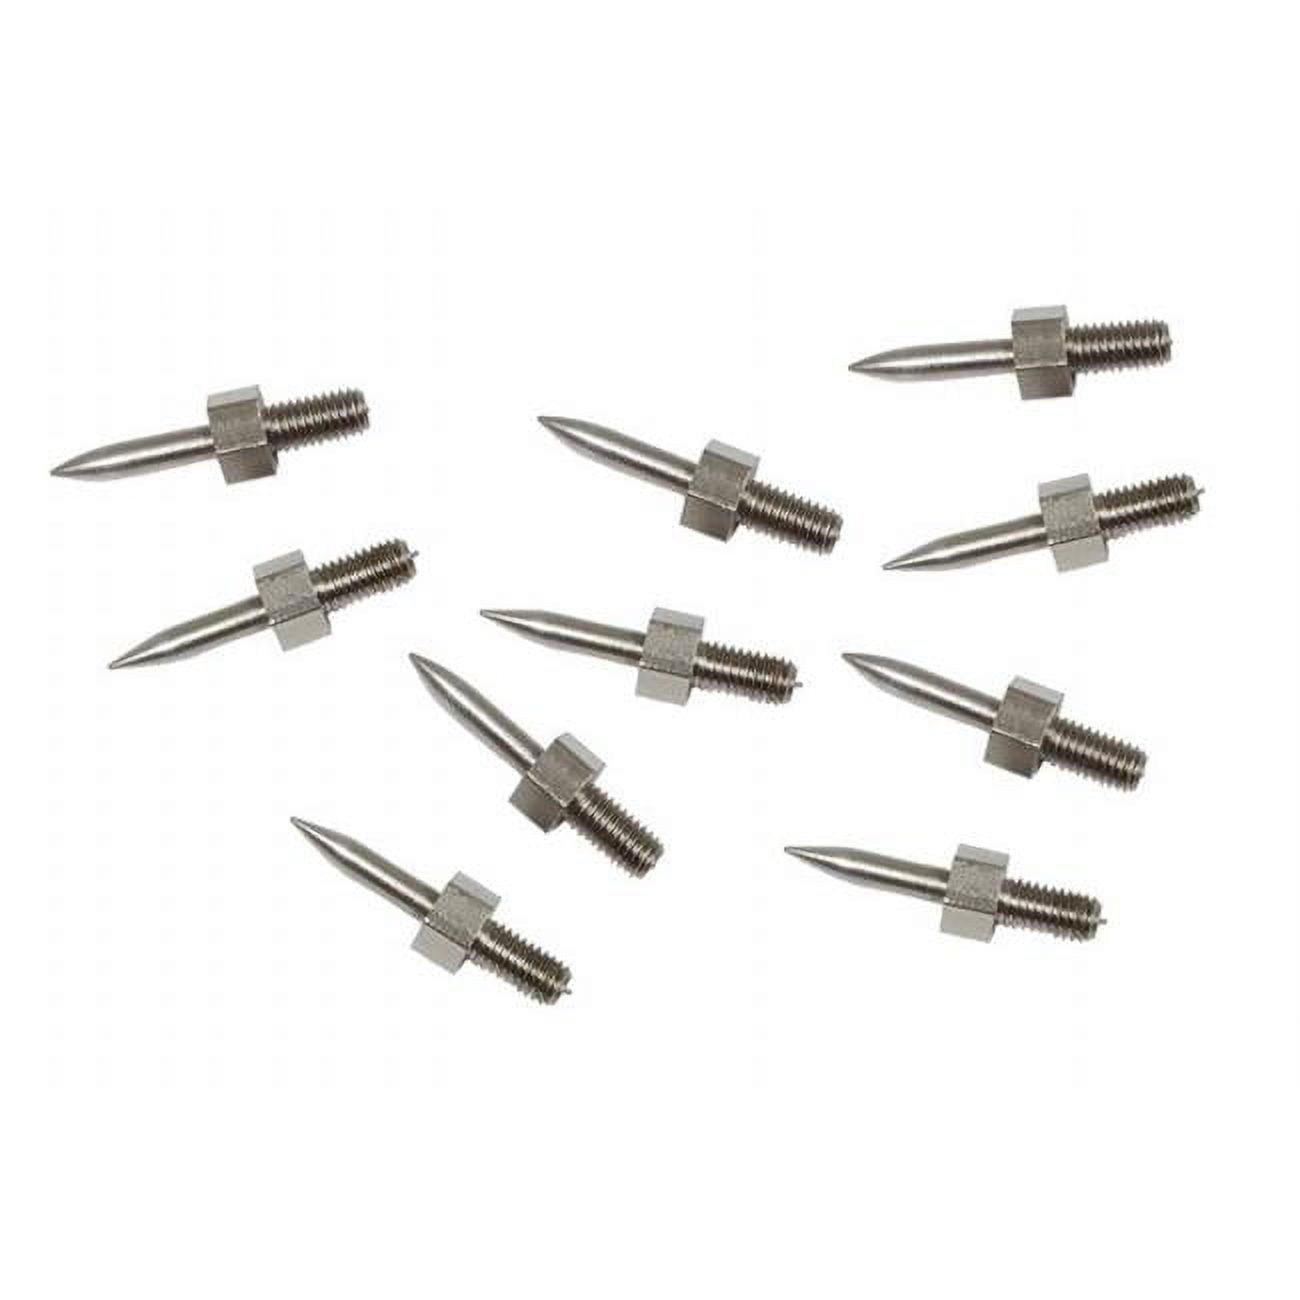 Stainless Steel Pins  Replacement Moisture Meter Pins